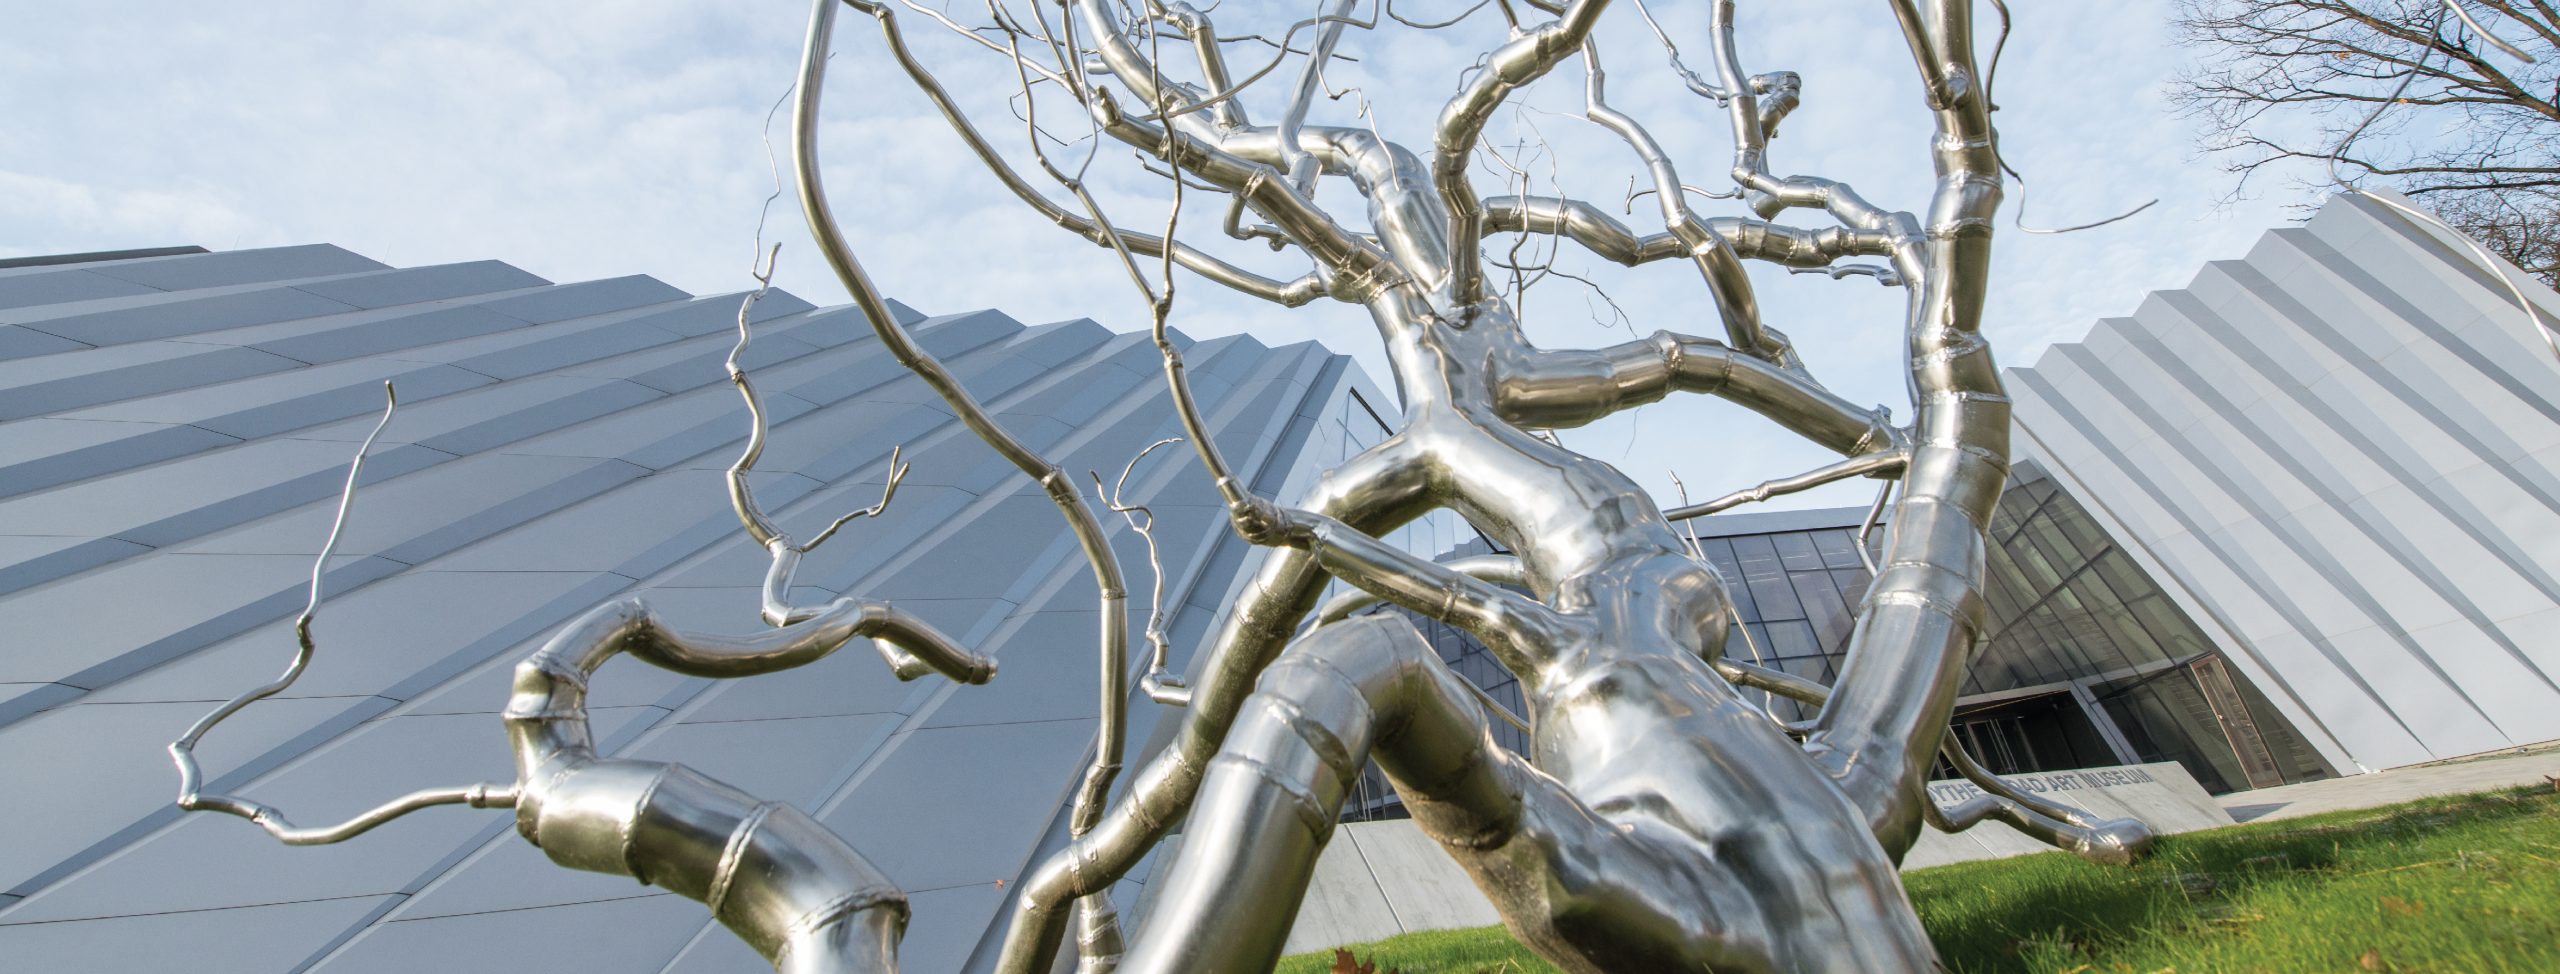 A sculpture at Broad Museum by Roxy Paine